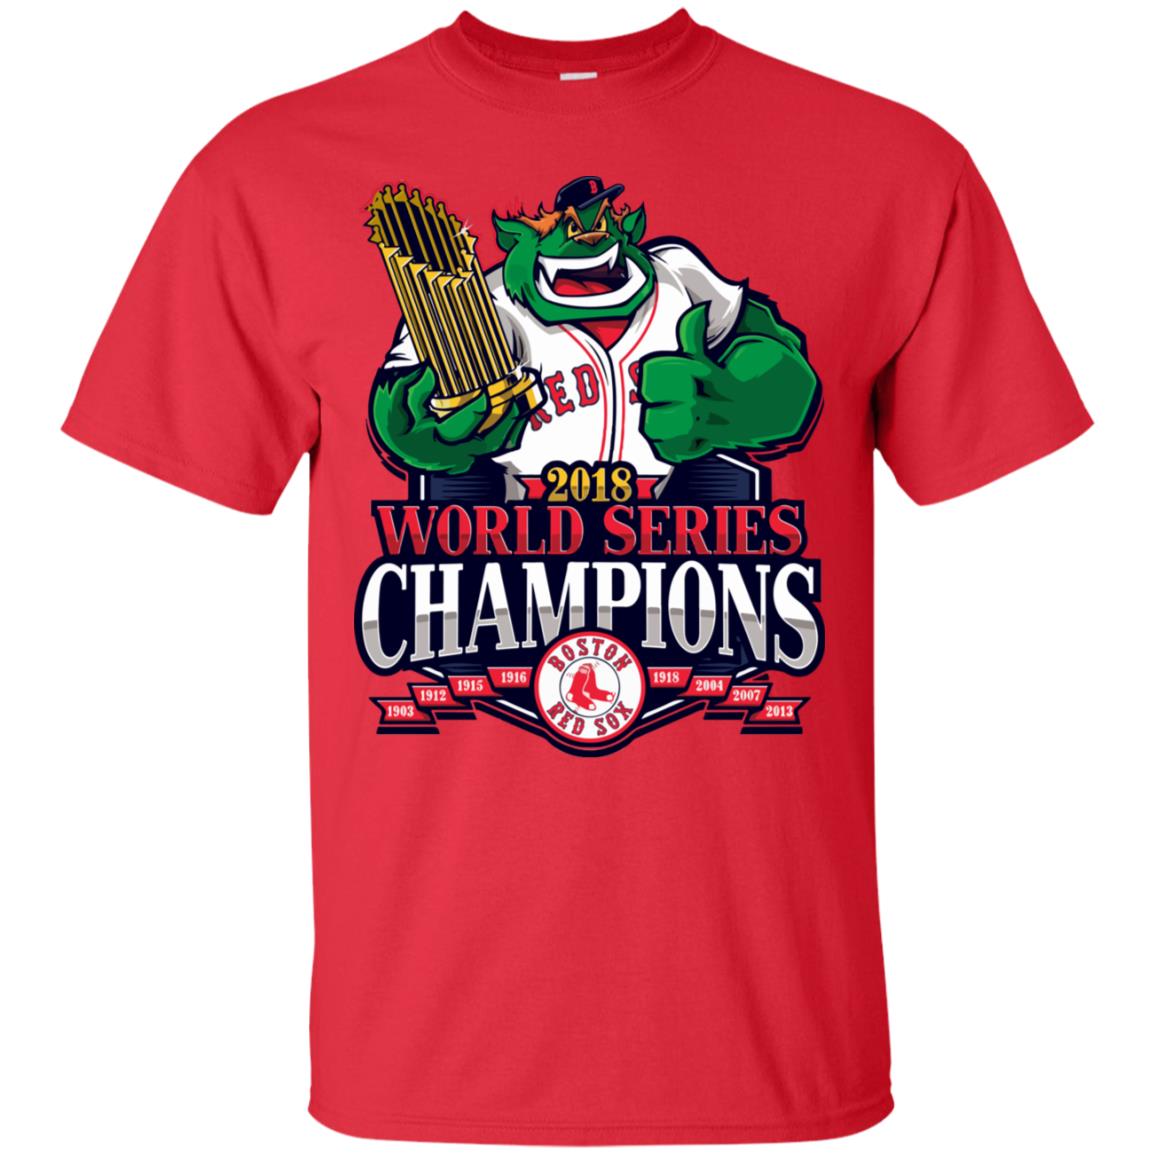 Damage Done Red Sox 2018 World Series Champions shirt, hoodie